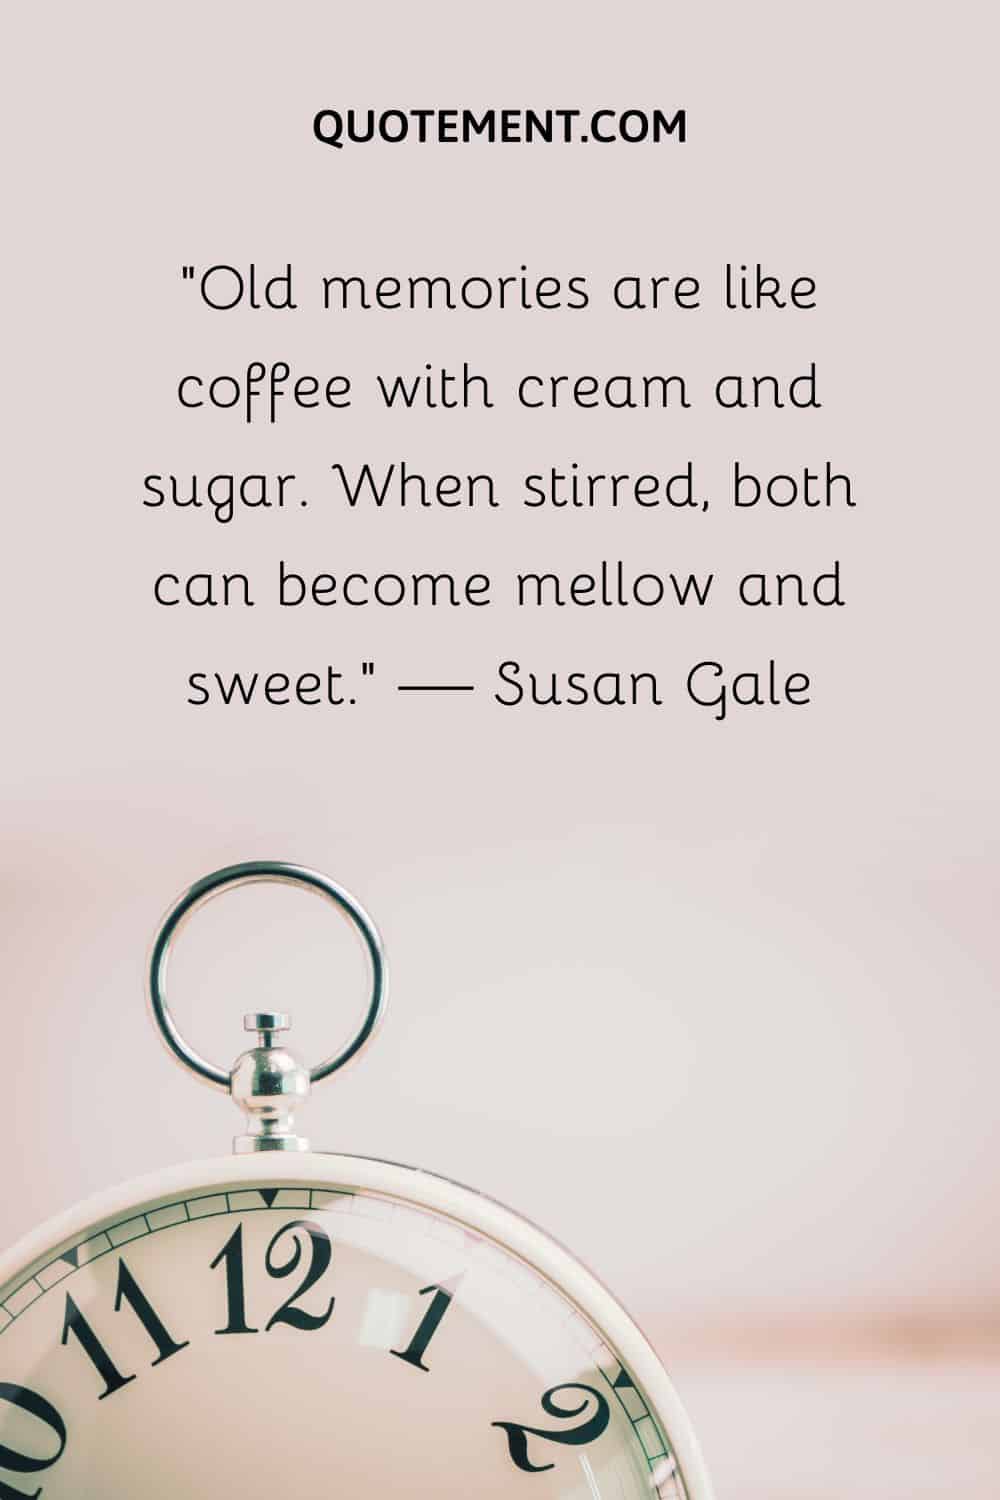 Old memories are like coffee with cream and sugar.